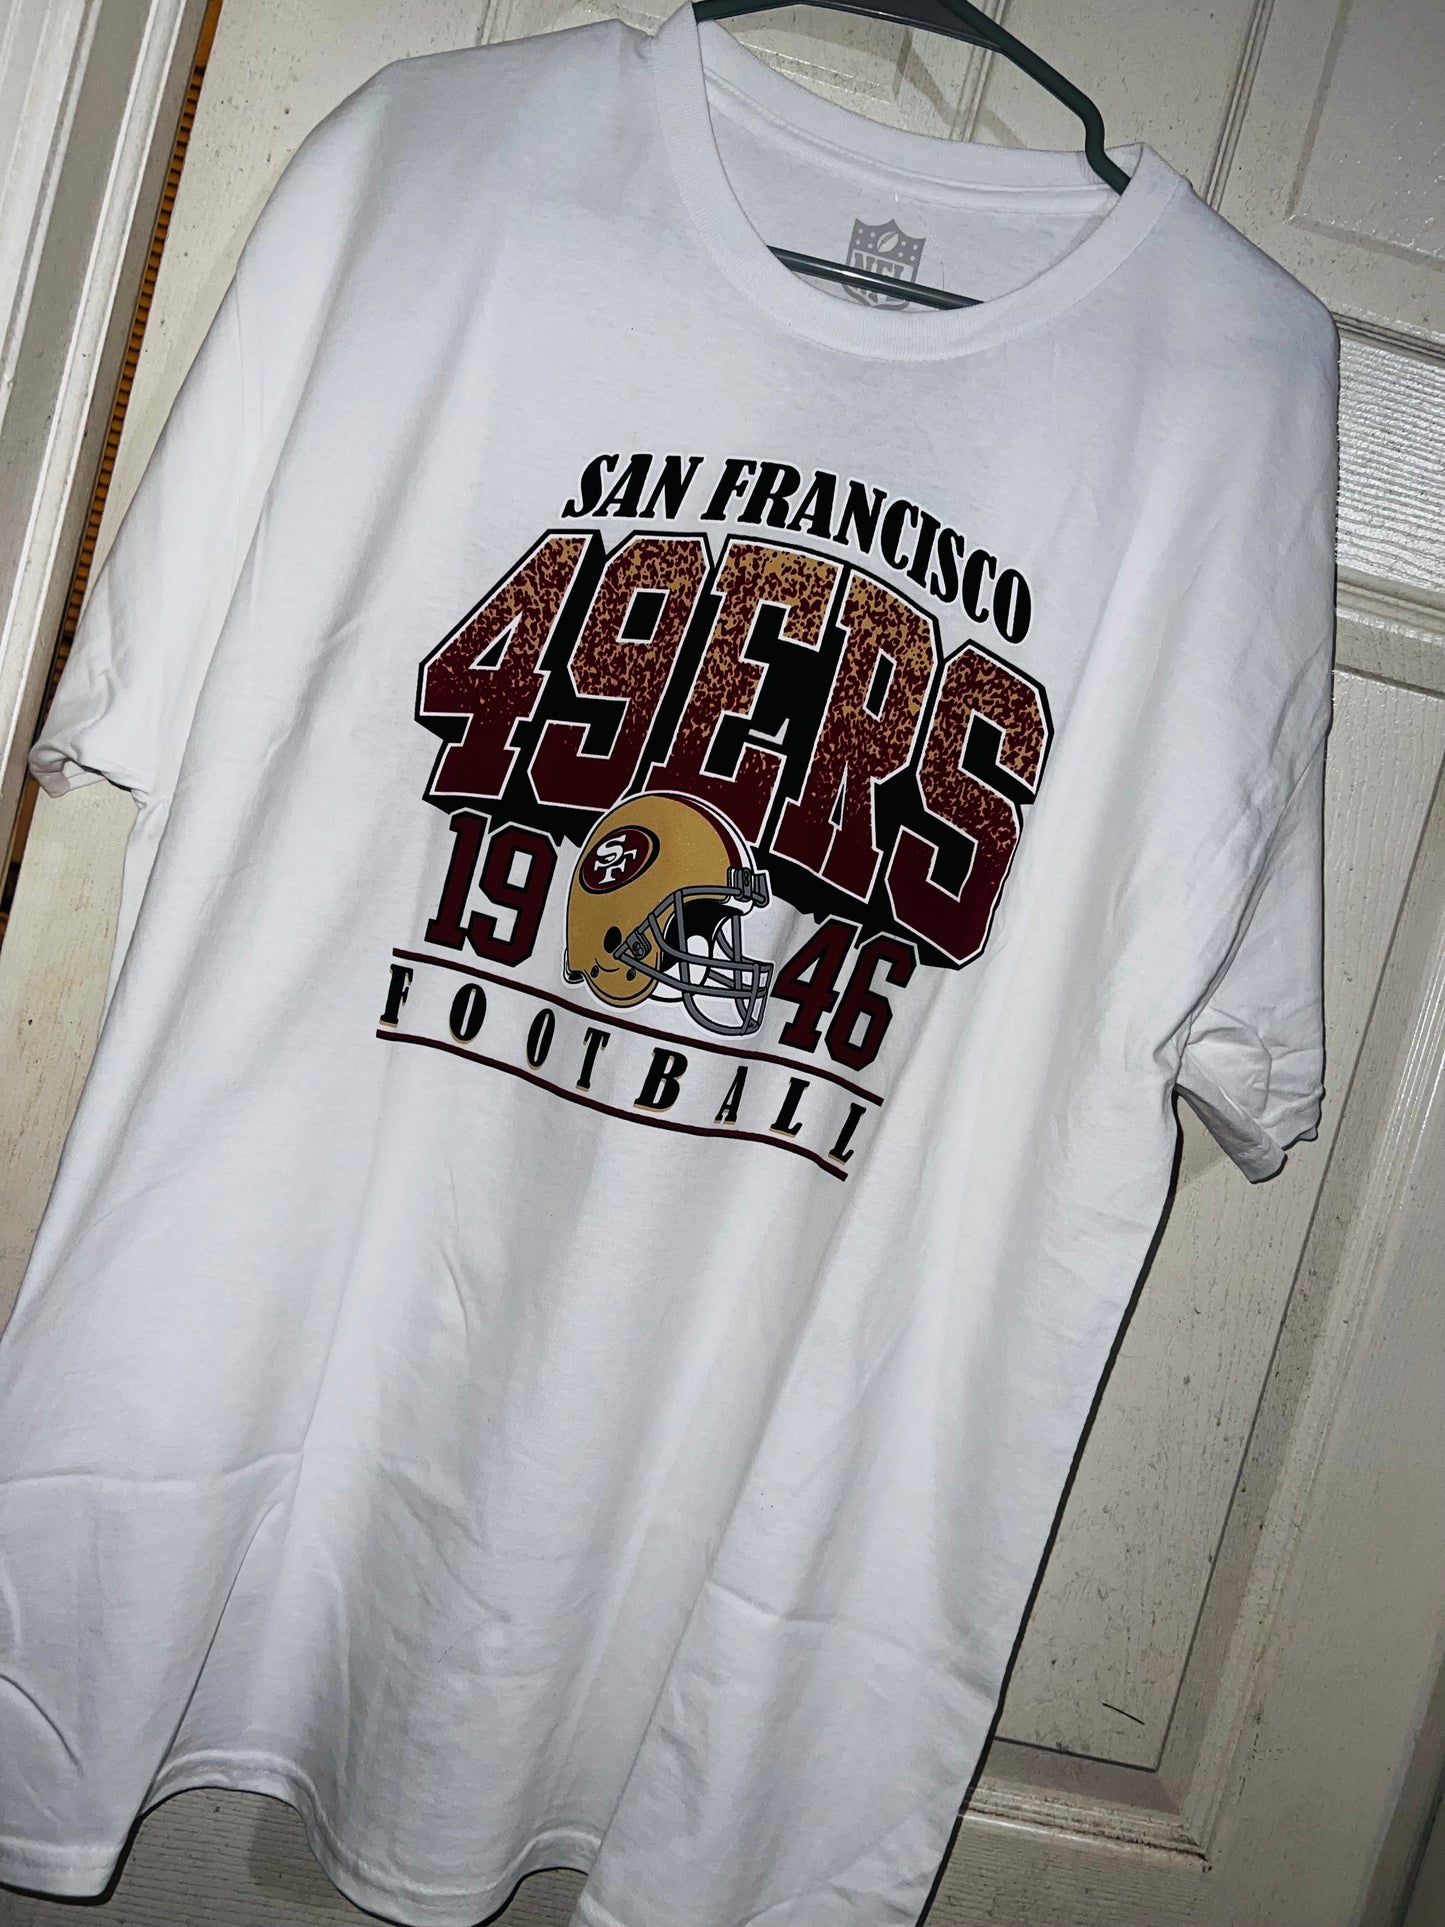 San Francisco 49ers Oversized Distressed Tee